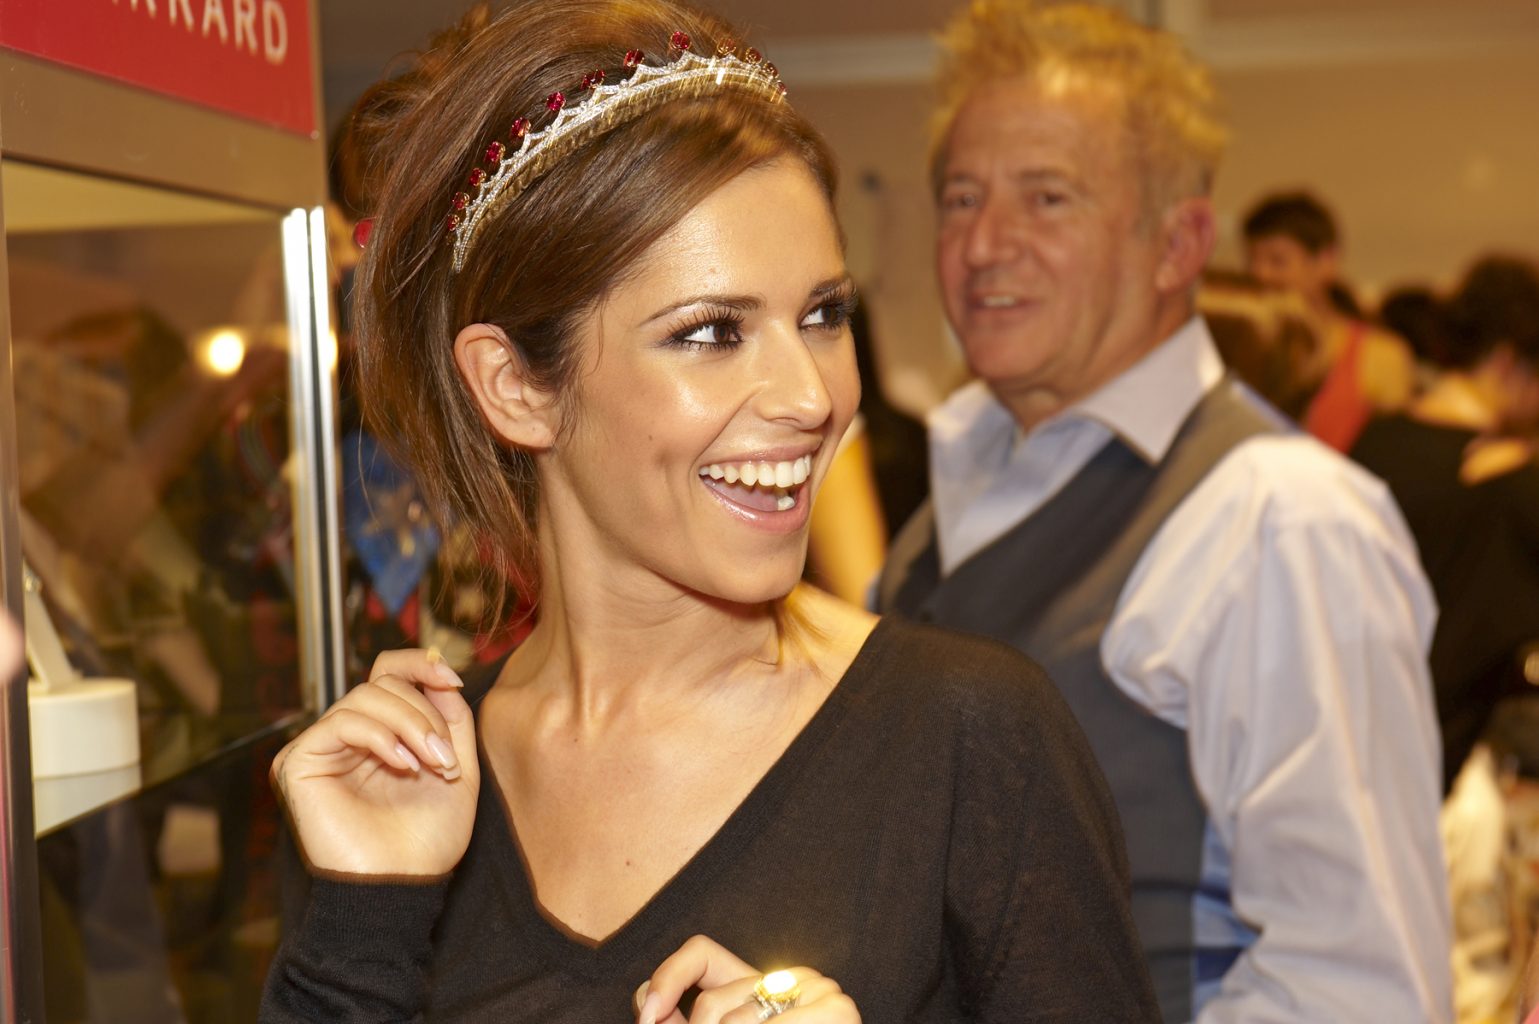 Cheryl Cole at a charity event sponsored by Garrard Jewelers.